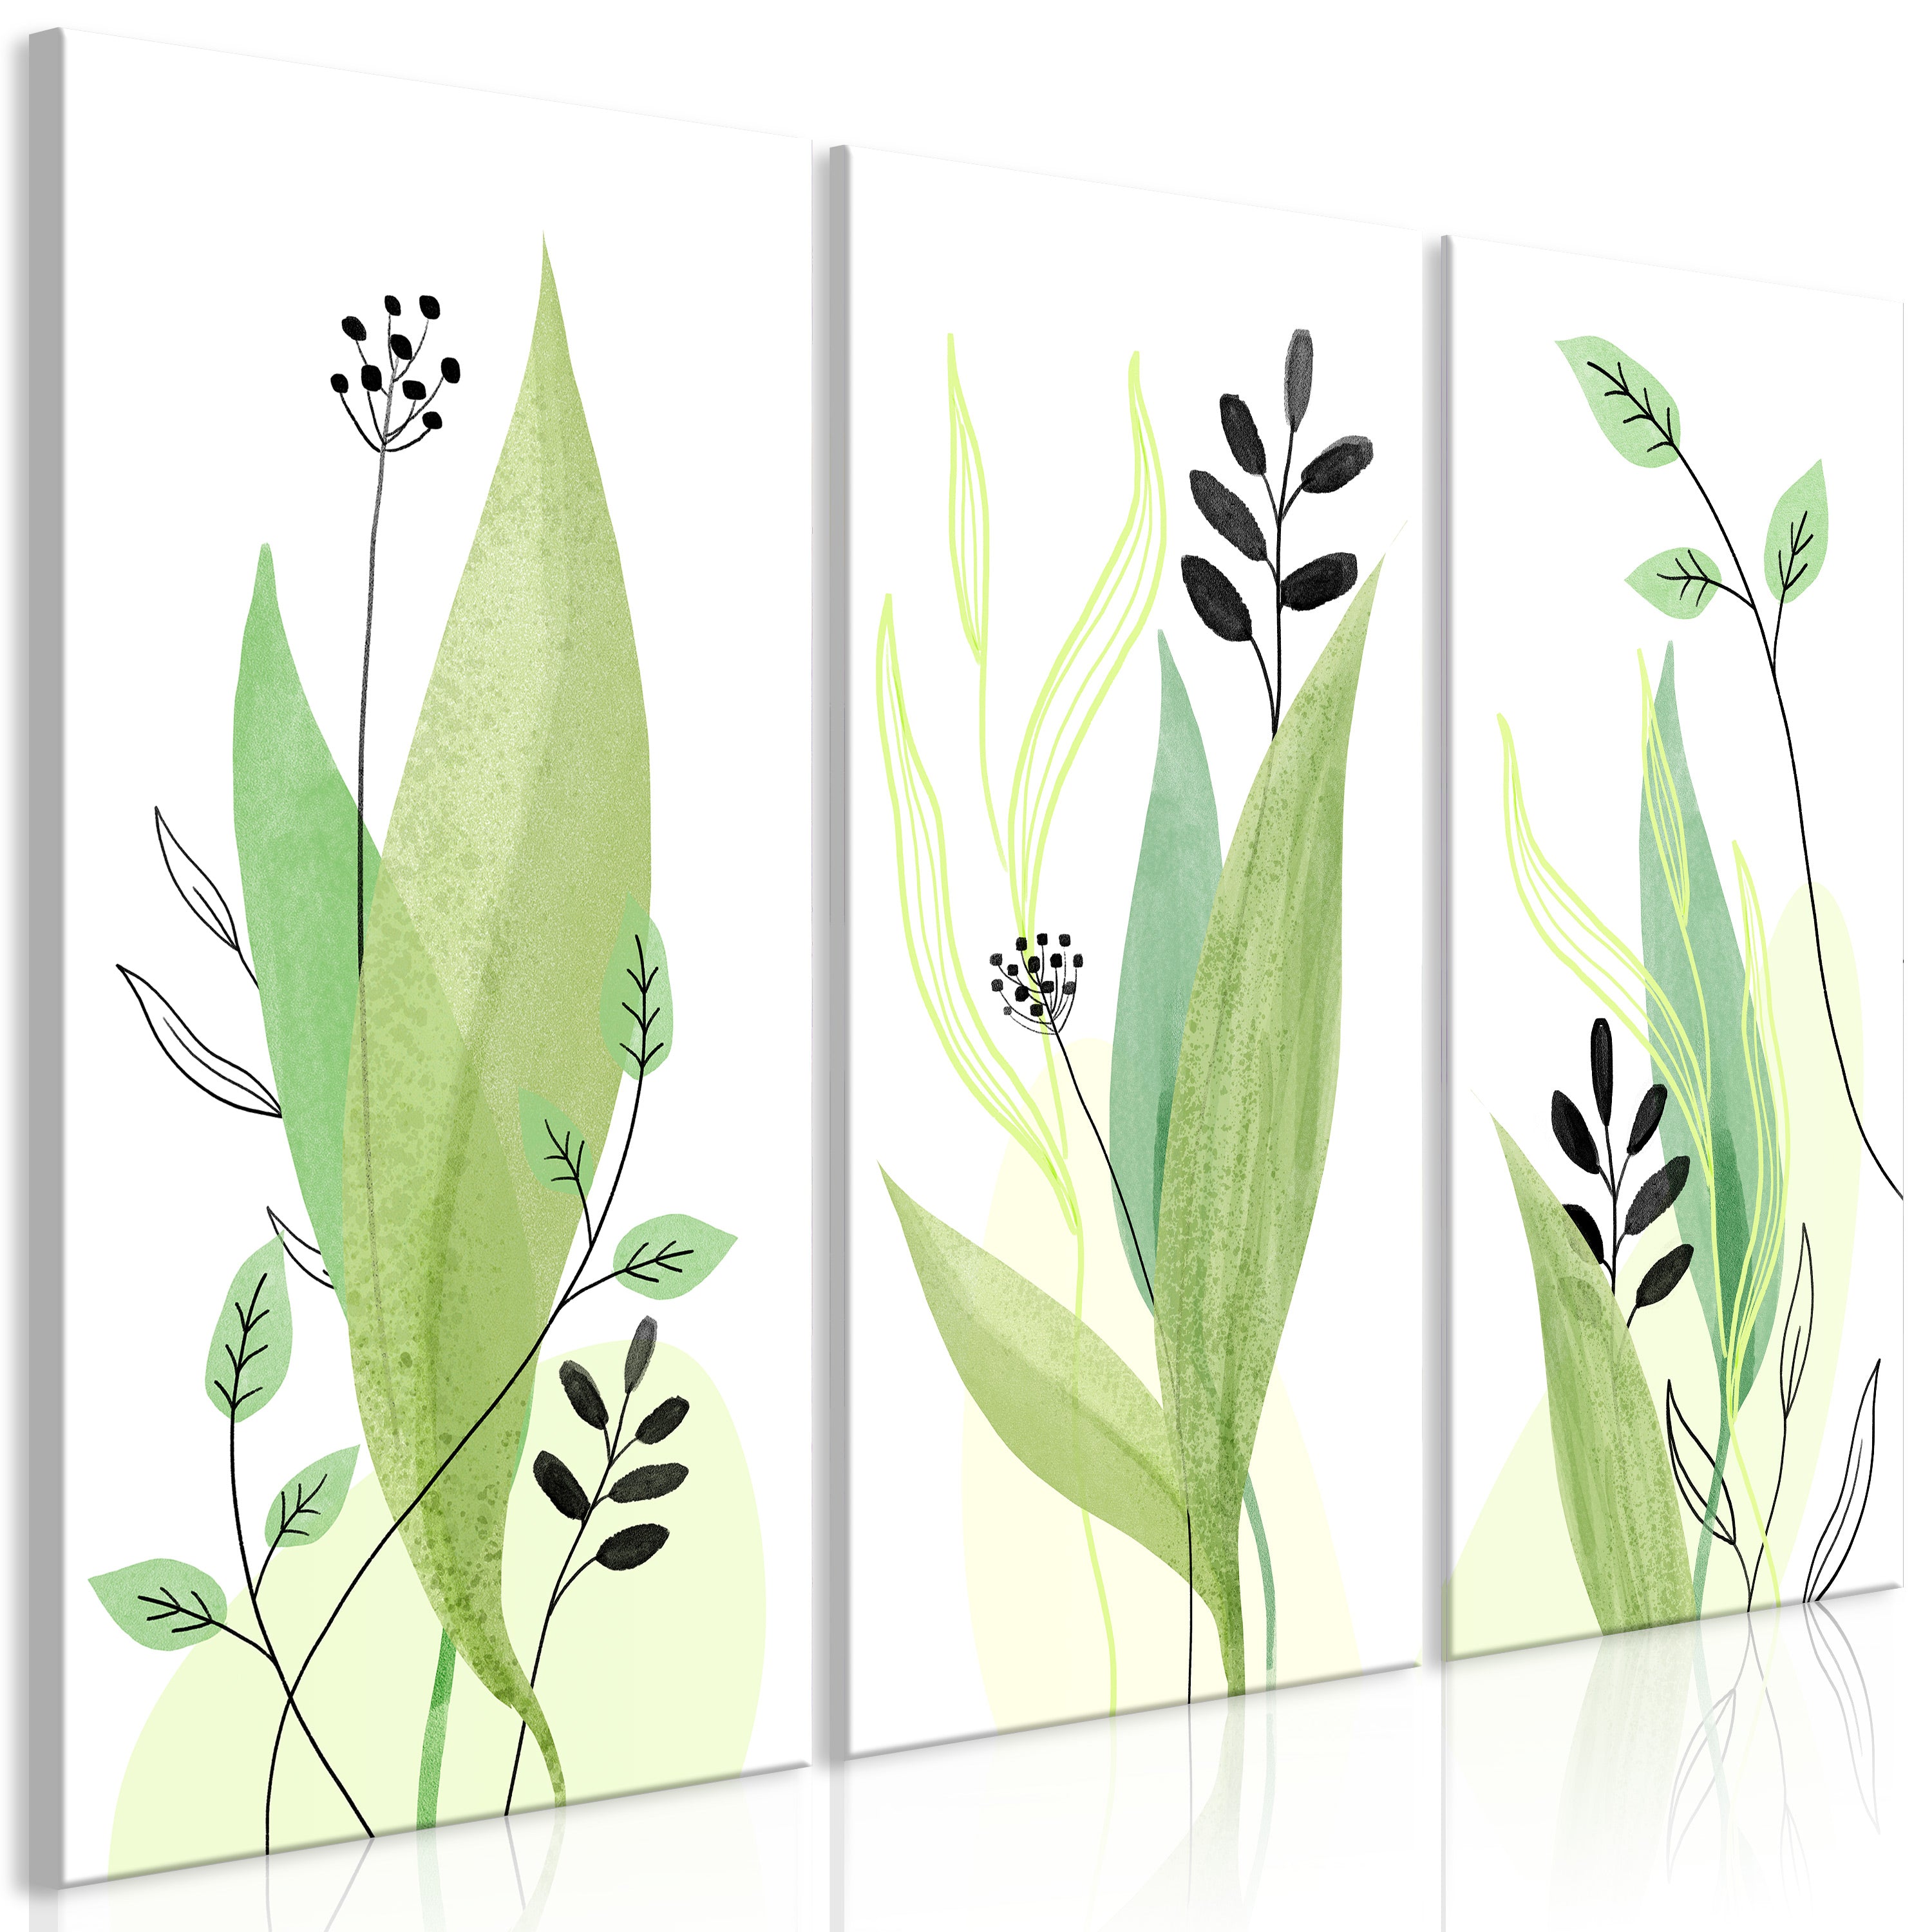 Botanical Canvas Wall Art - Green Day - 3 Pieces